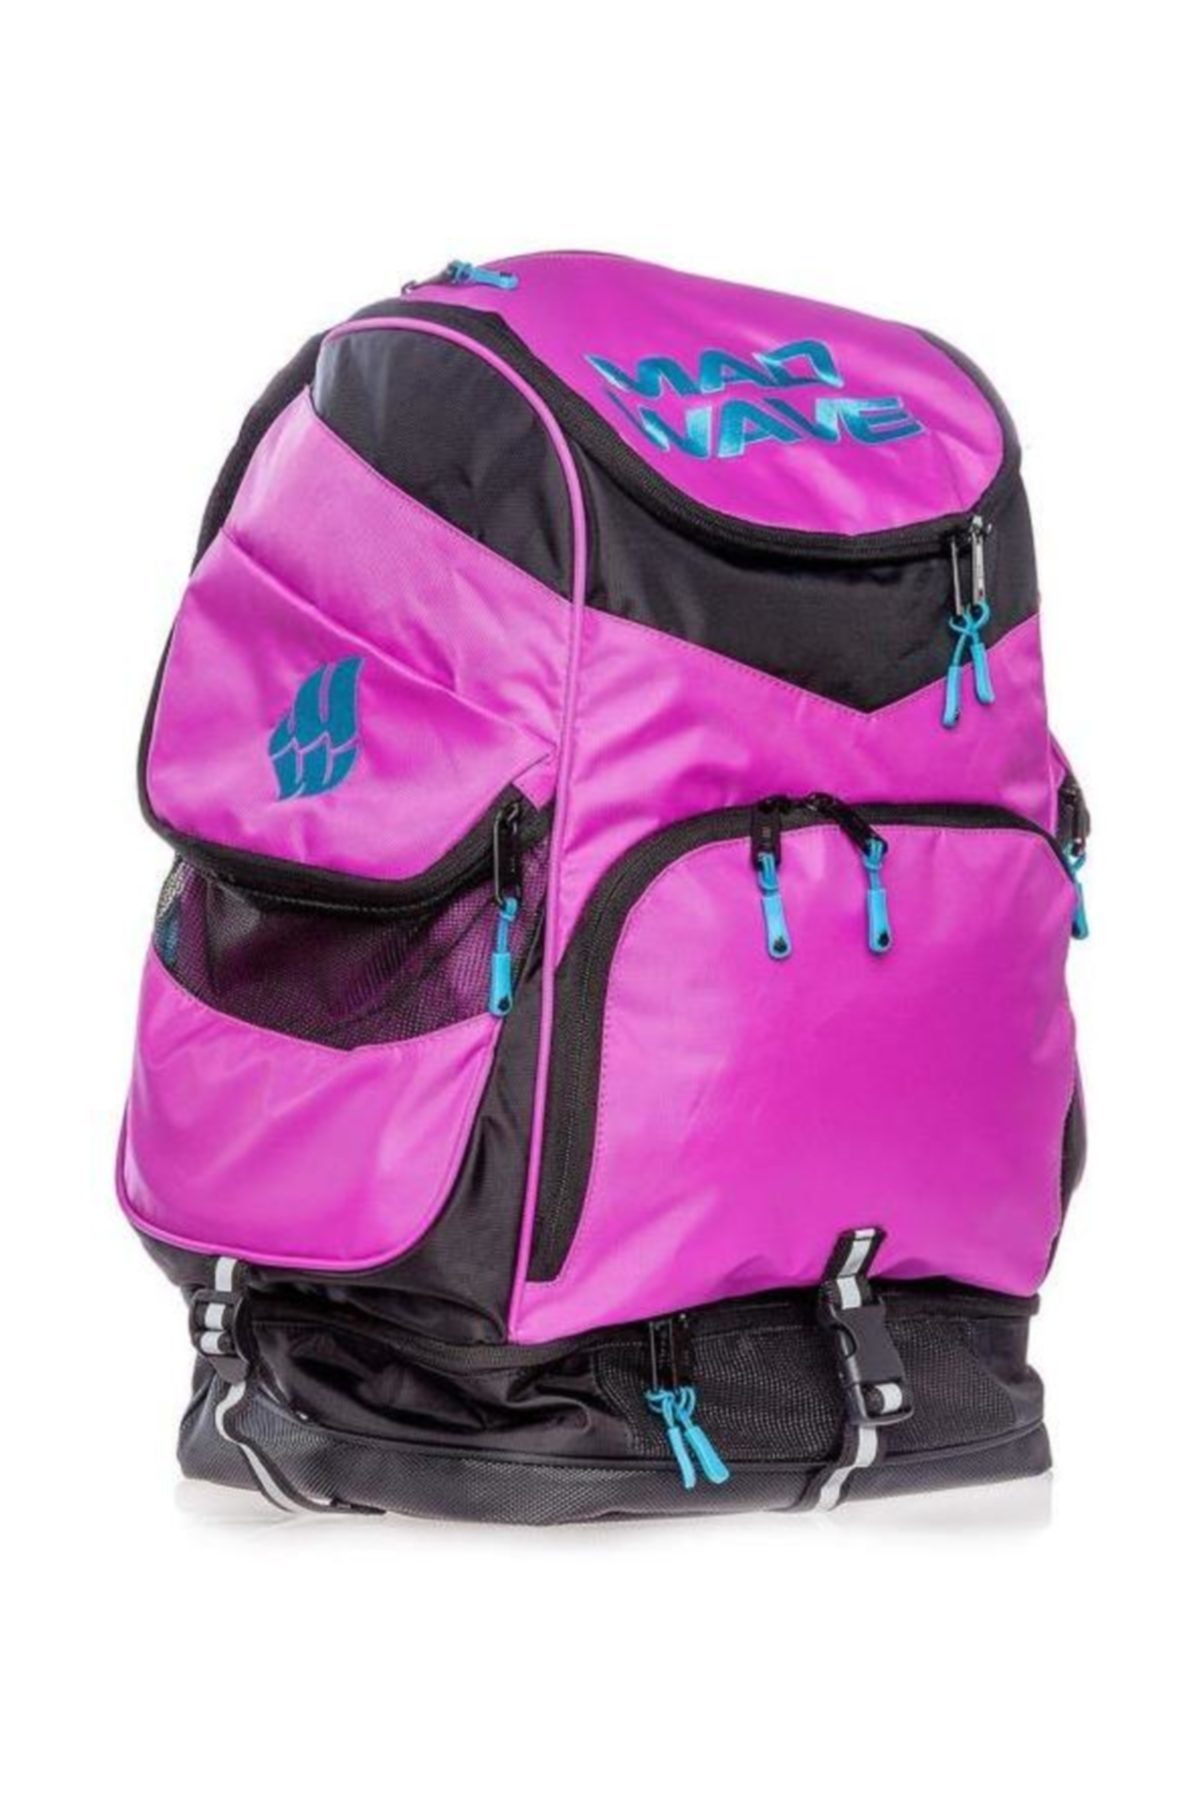 Mad Wave M1123 01 0 11w Backpack Backpack Mad Team, 52?32?2